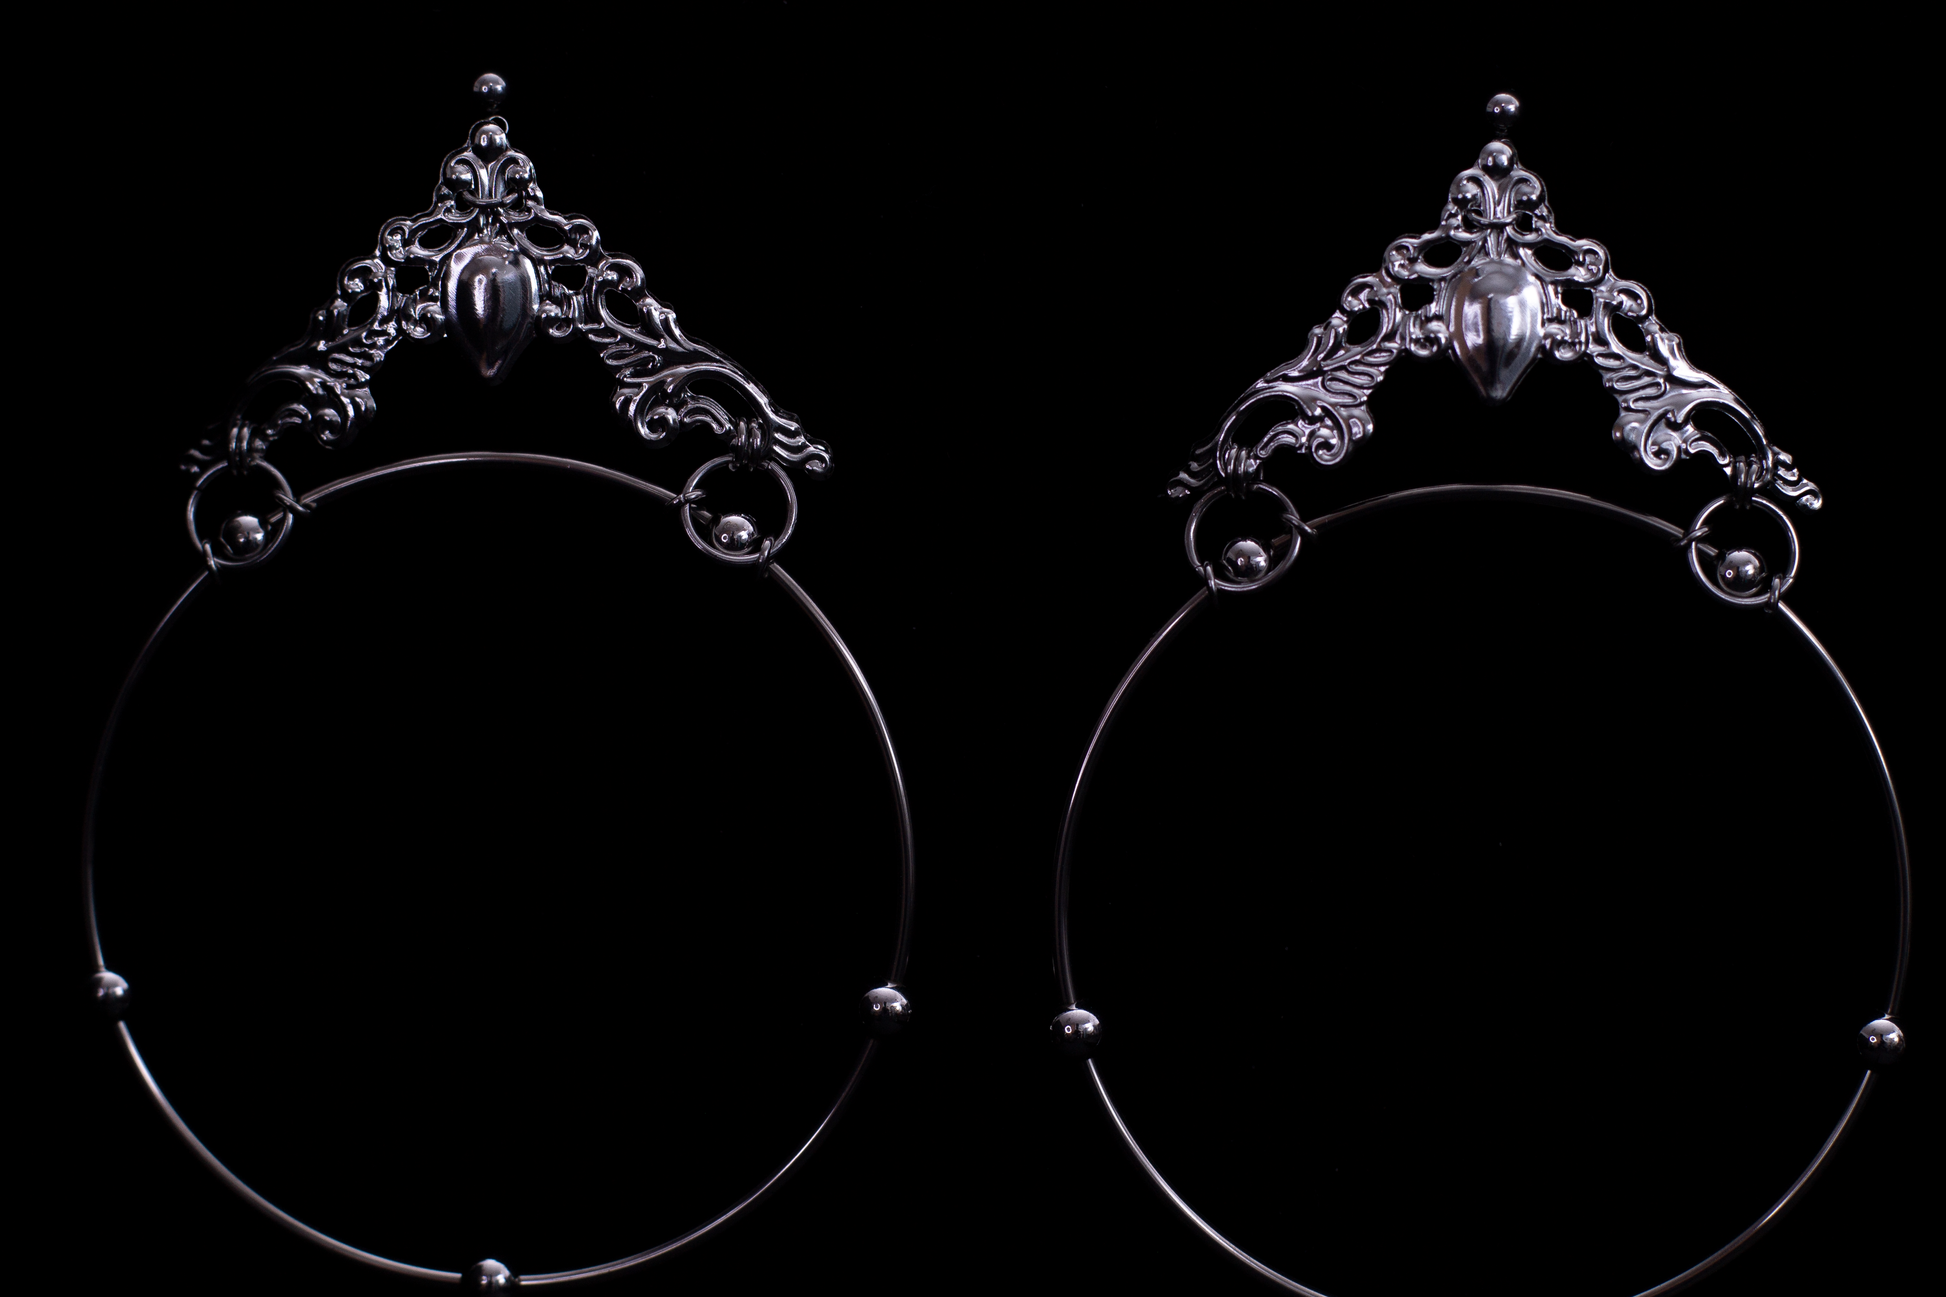 Showcasing Myril Jewels’ bold gothic hoop earrings, these pieces flaunt wide loops with ornate, gothic-inspired filigree and a central teardrop gemstone, radiating dark elegance. Ideal for the gothic-chic, these earrings are a statement accessory for Halloween, festivals, or as a distinctive gift for the goth-loving friend